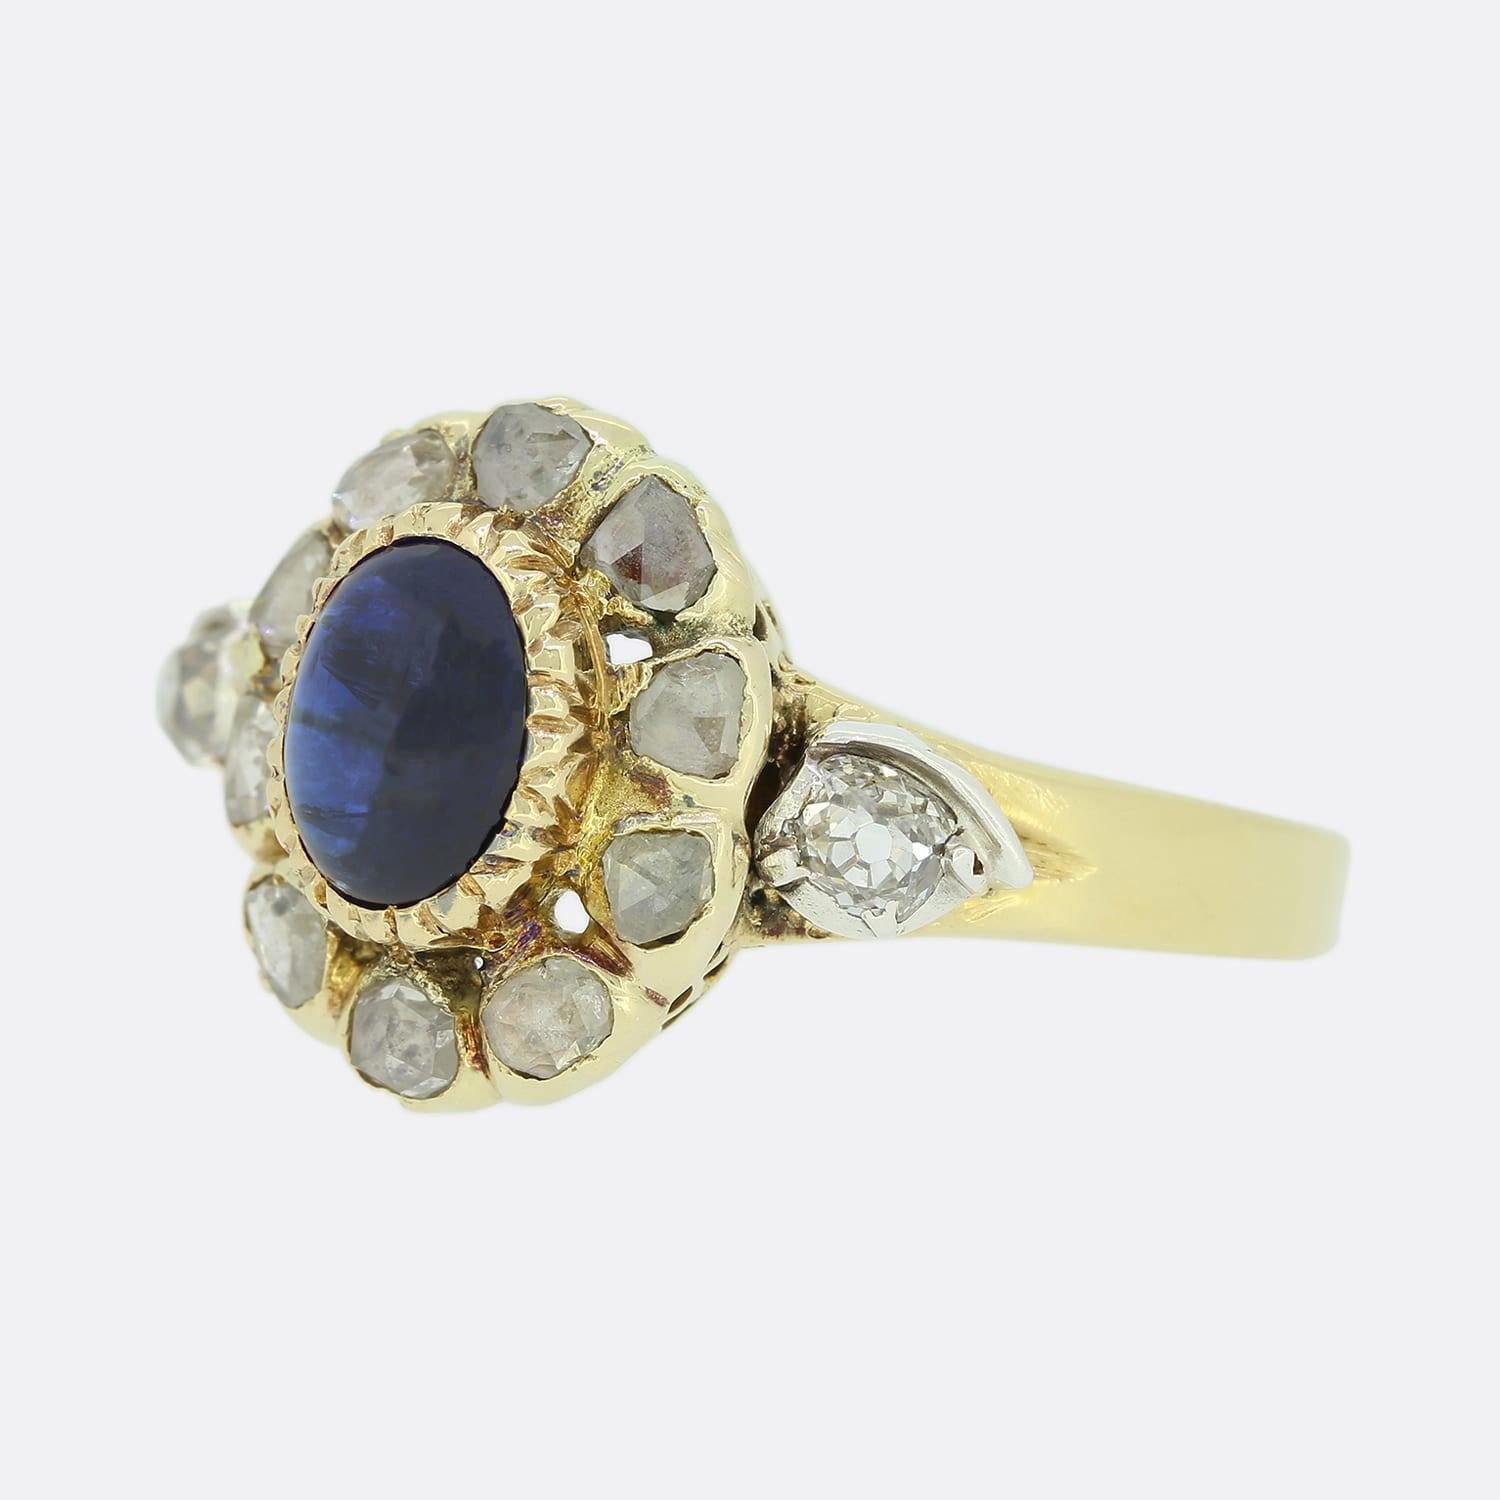 This is an 18ct yellow gold oval cluster ring. The ring is set with a centralised oval cut rub-over set cabochon sapphire which is surrounded by a cluster of rose cut diamonds. The head of the ring originally started life as a necklace clasp.
The